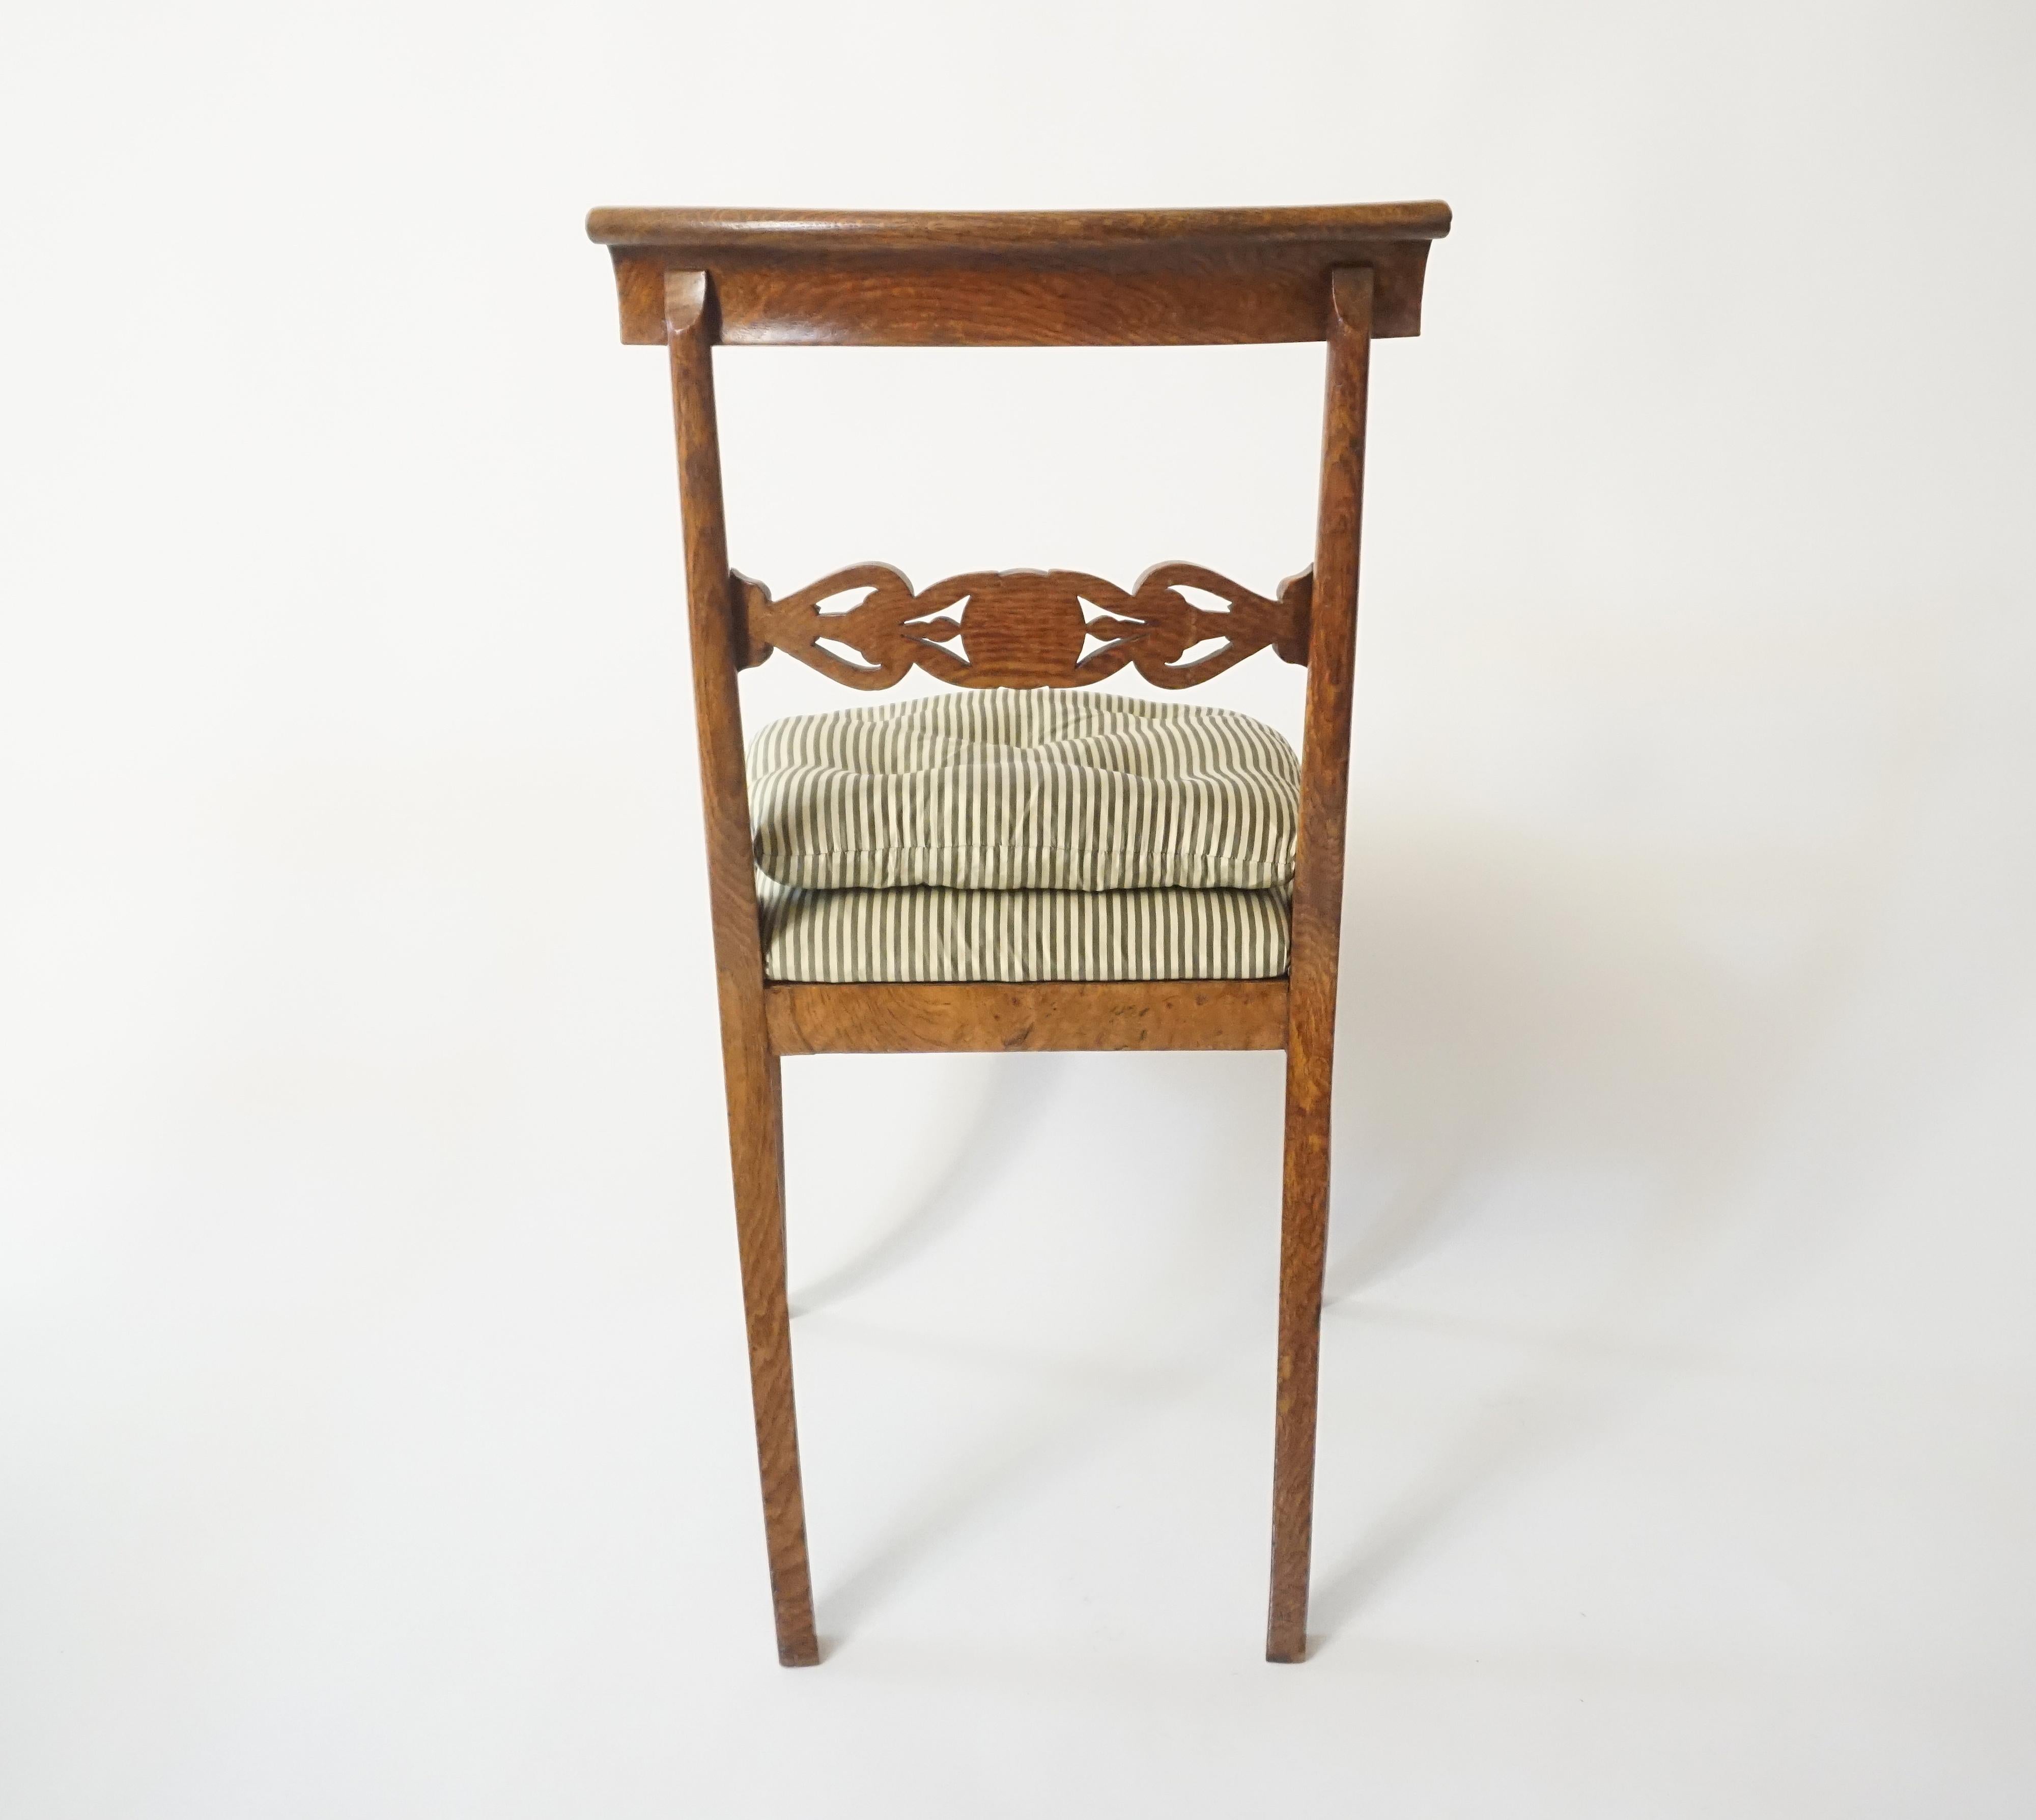 19th Century Chairs by George Bullock, Set of 4, England, 1816